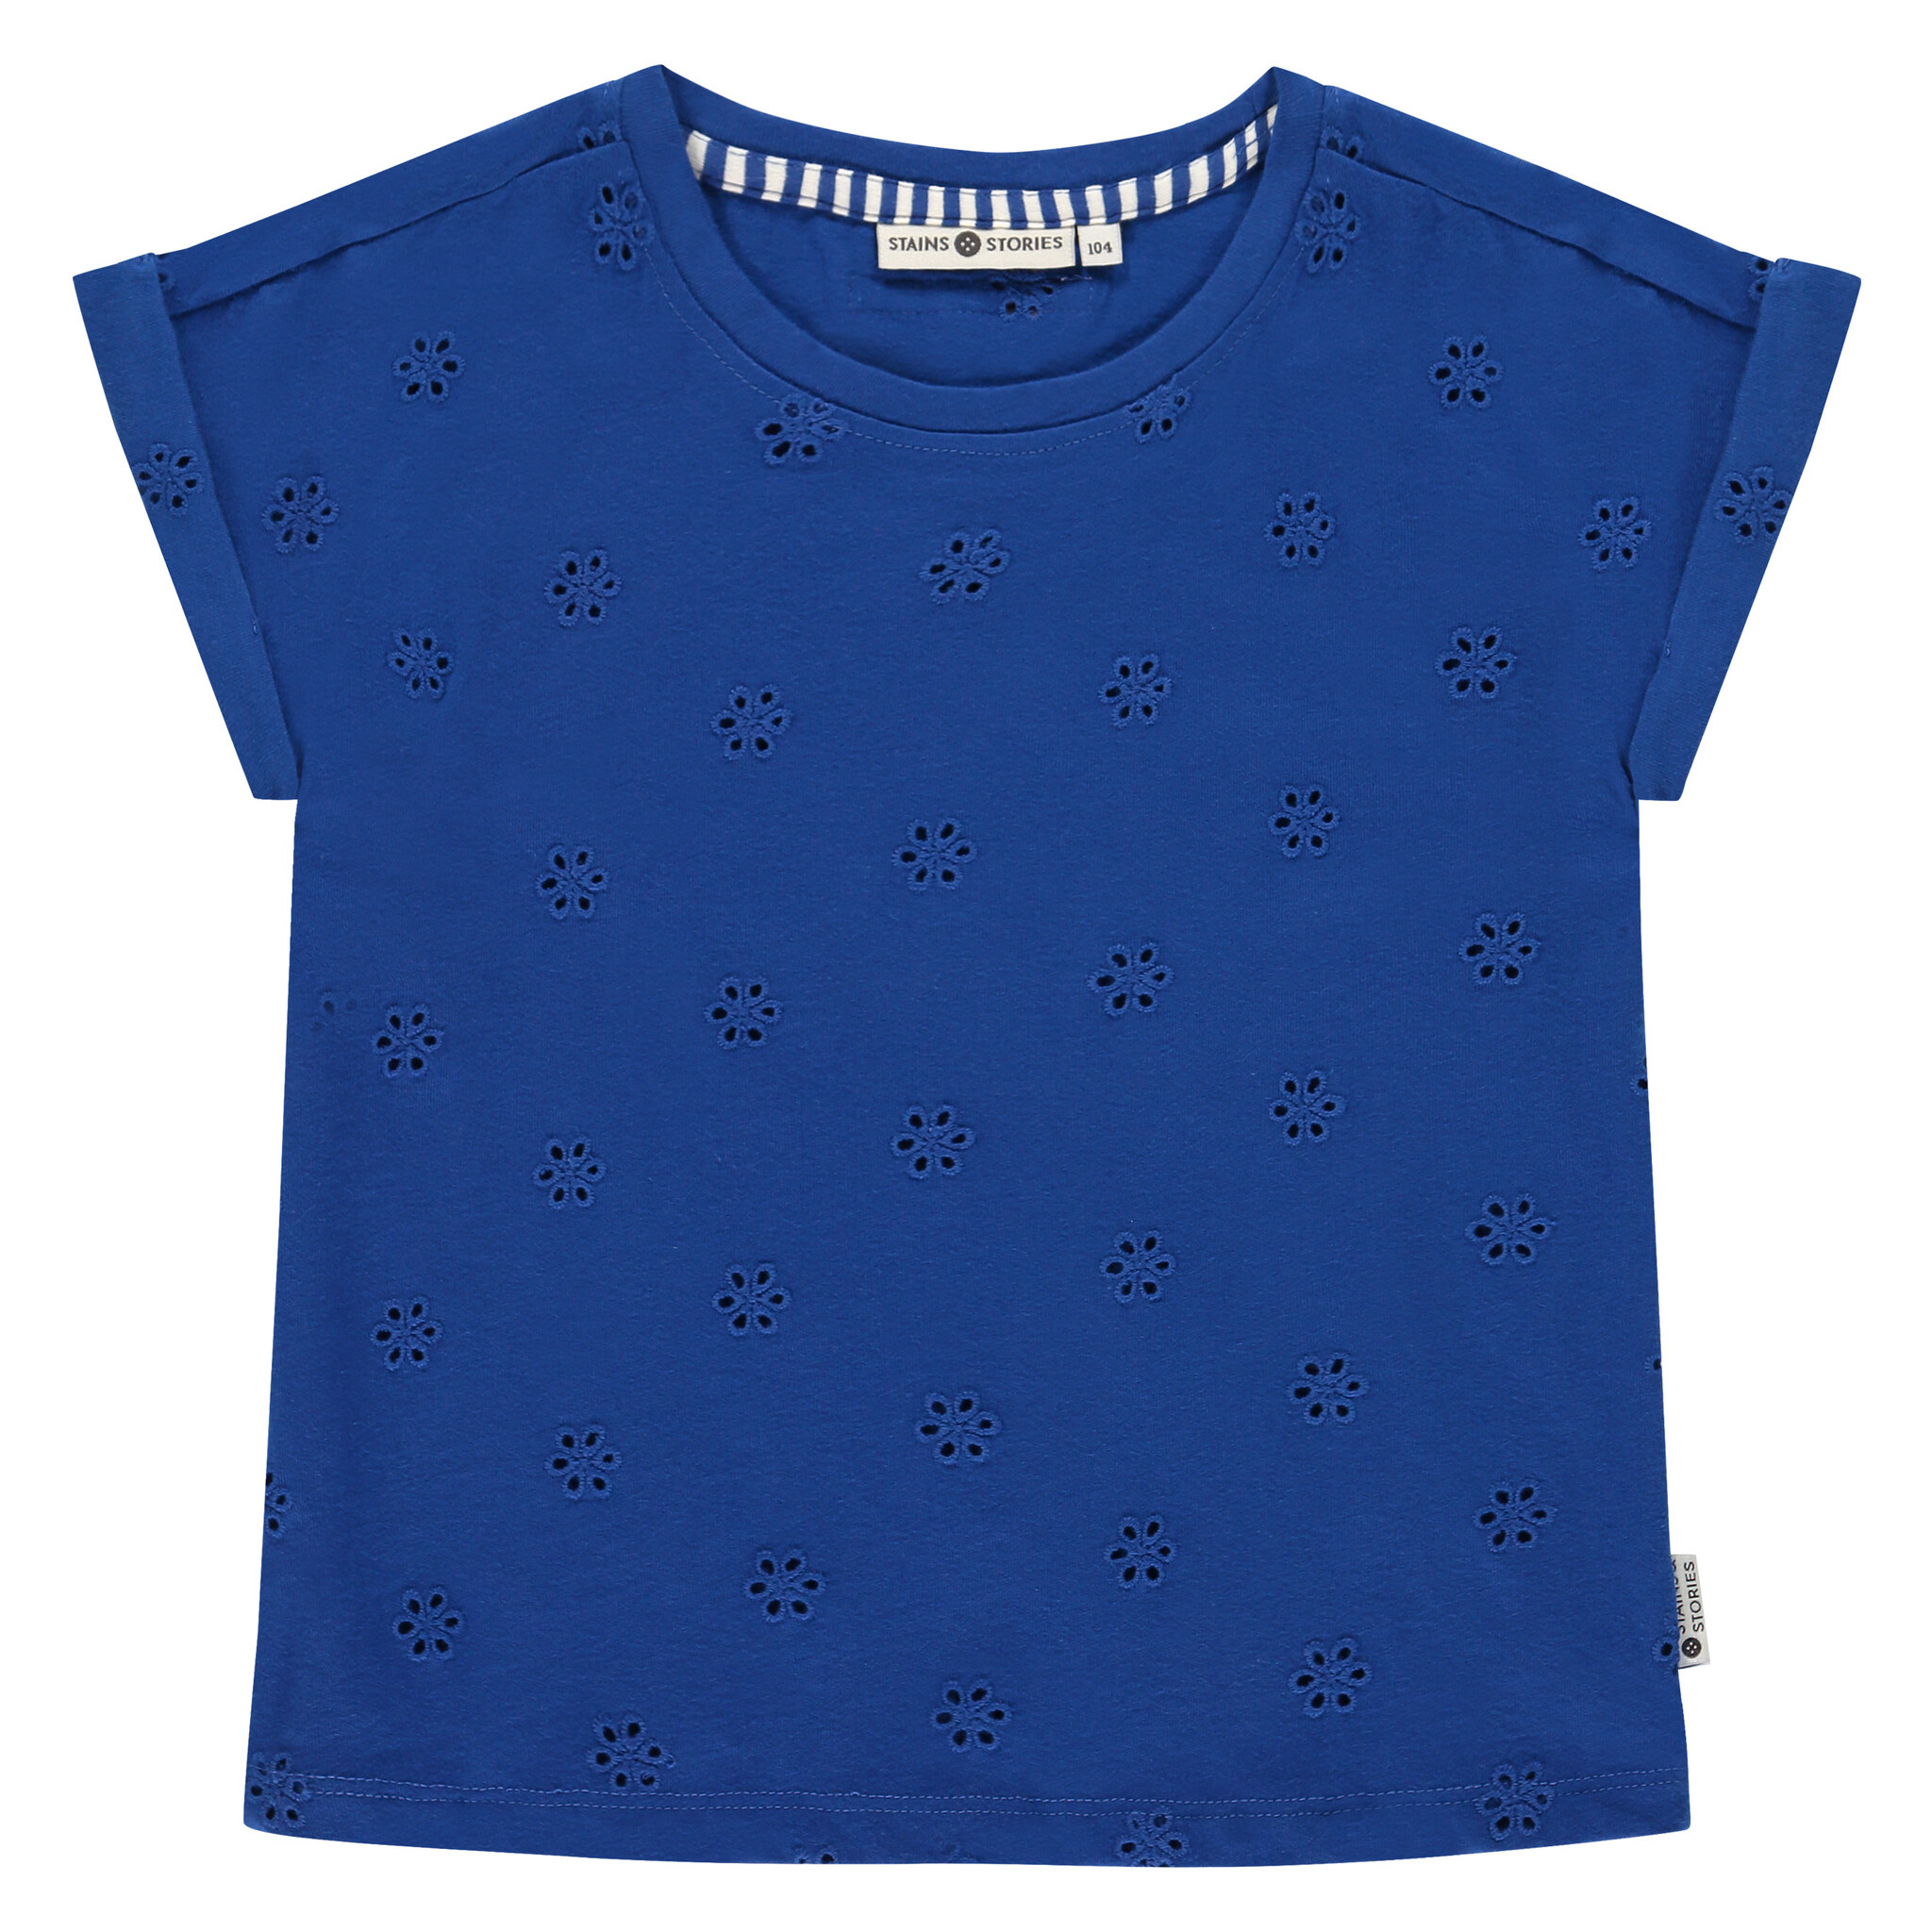 Stains & Stories-collectie T-shirt (cobalt)